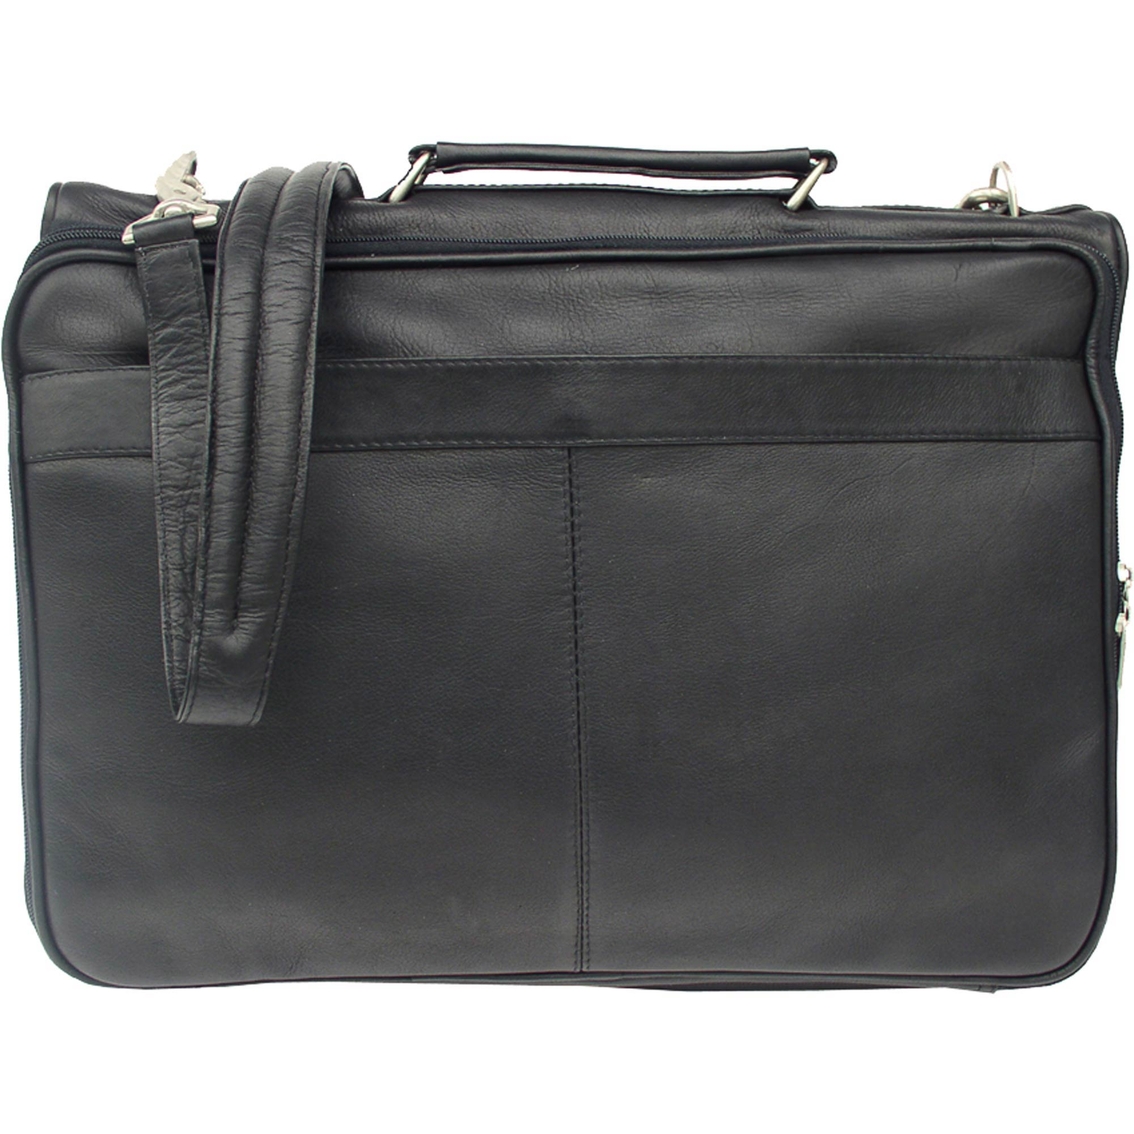 Piel Leather Double Executive Computer Bag | Business Cases | Clothing ...